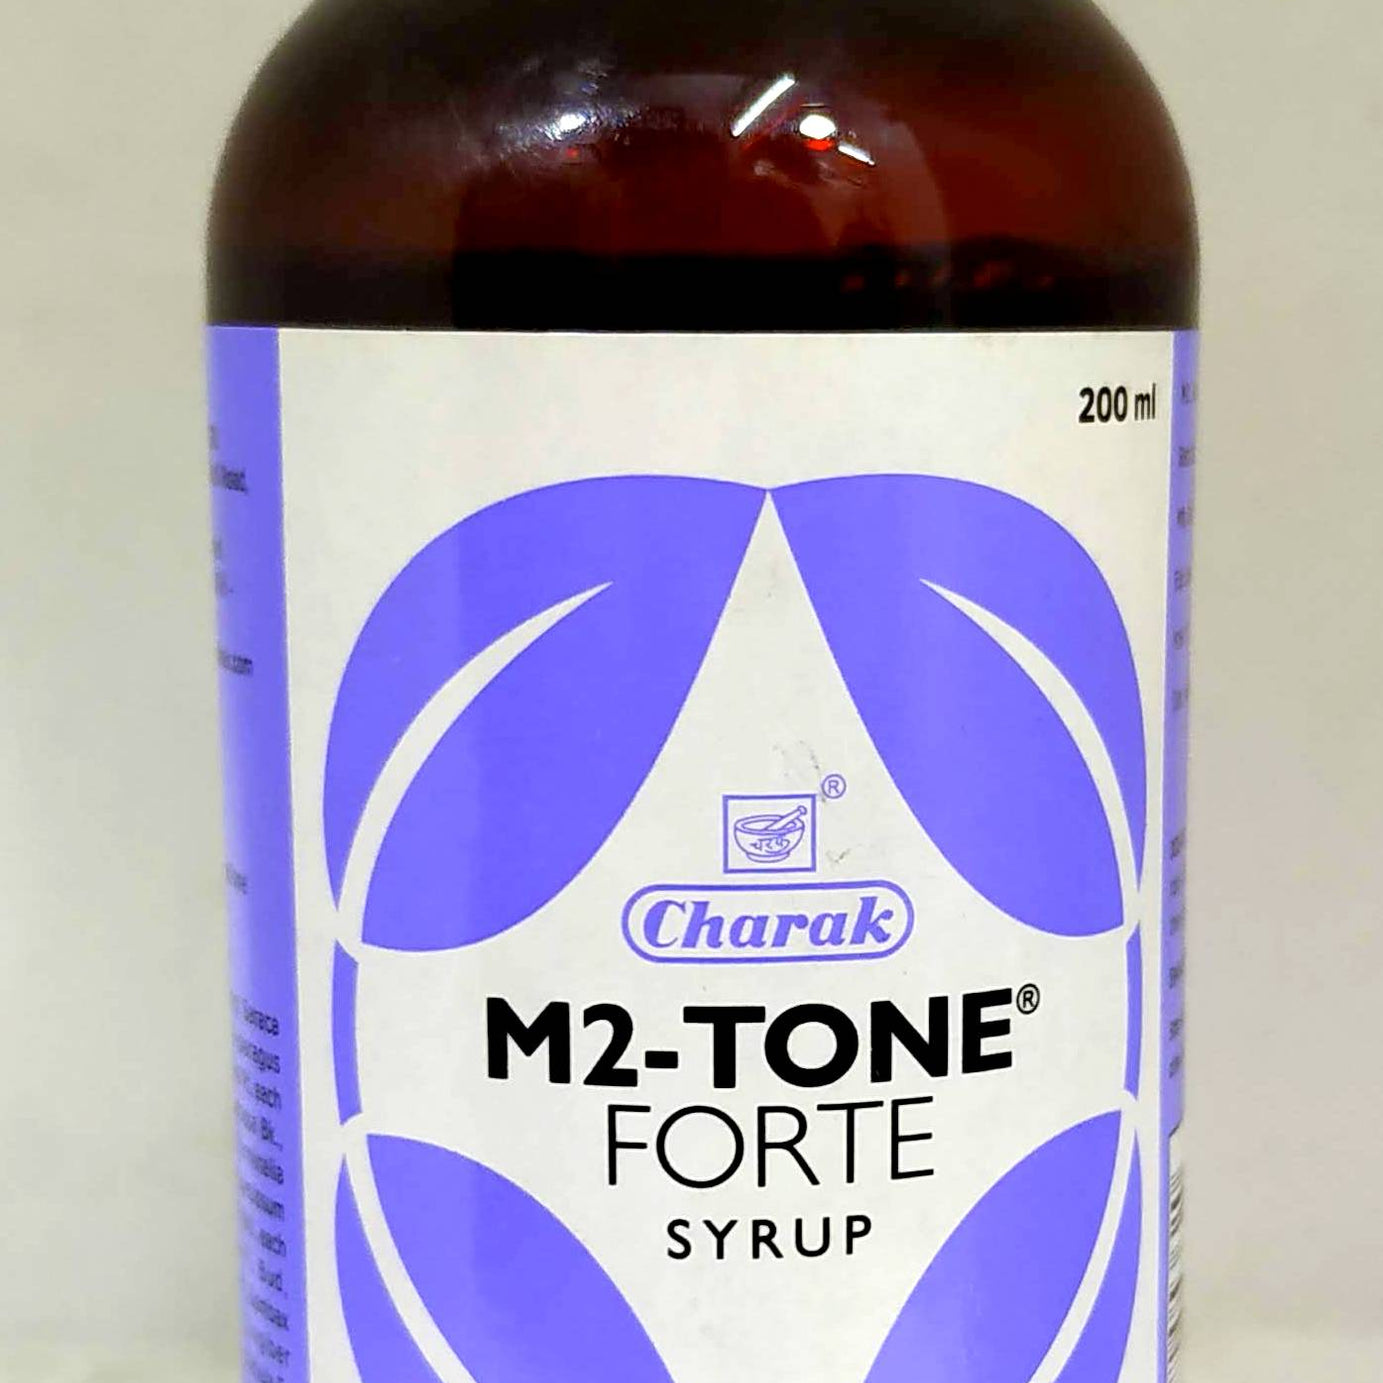 Shop M2 Tone Forte Syrup 200ml at price 131.00 from Charak Online - Ayush Care